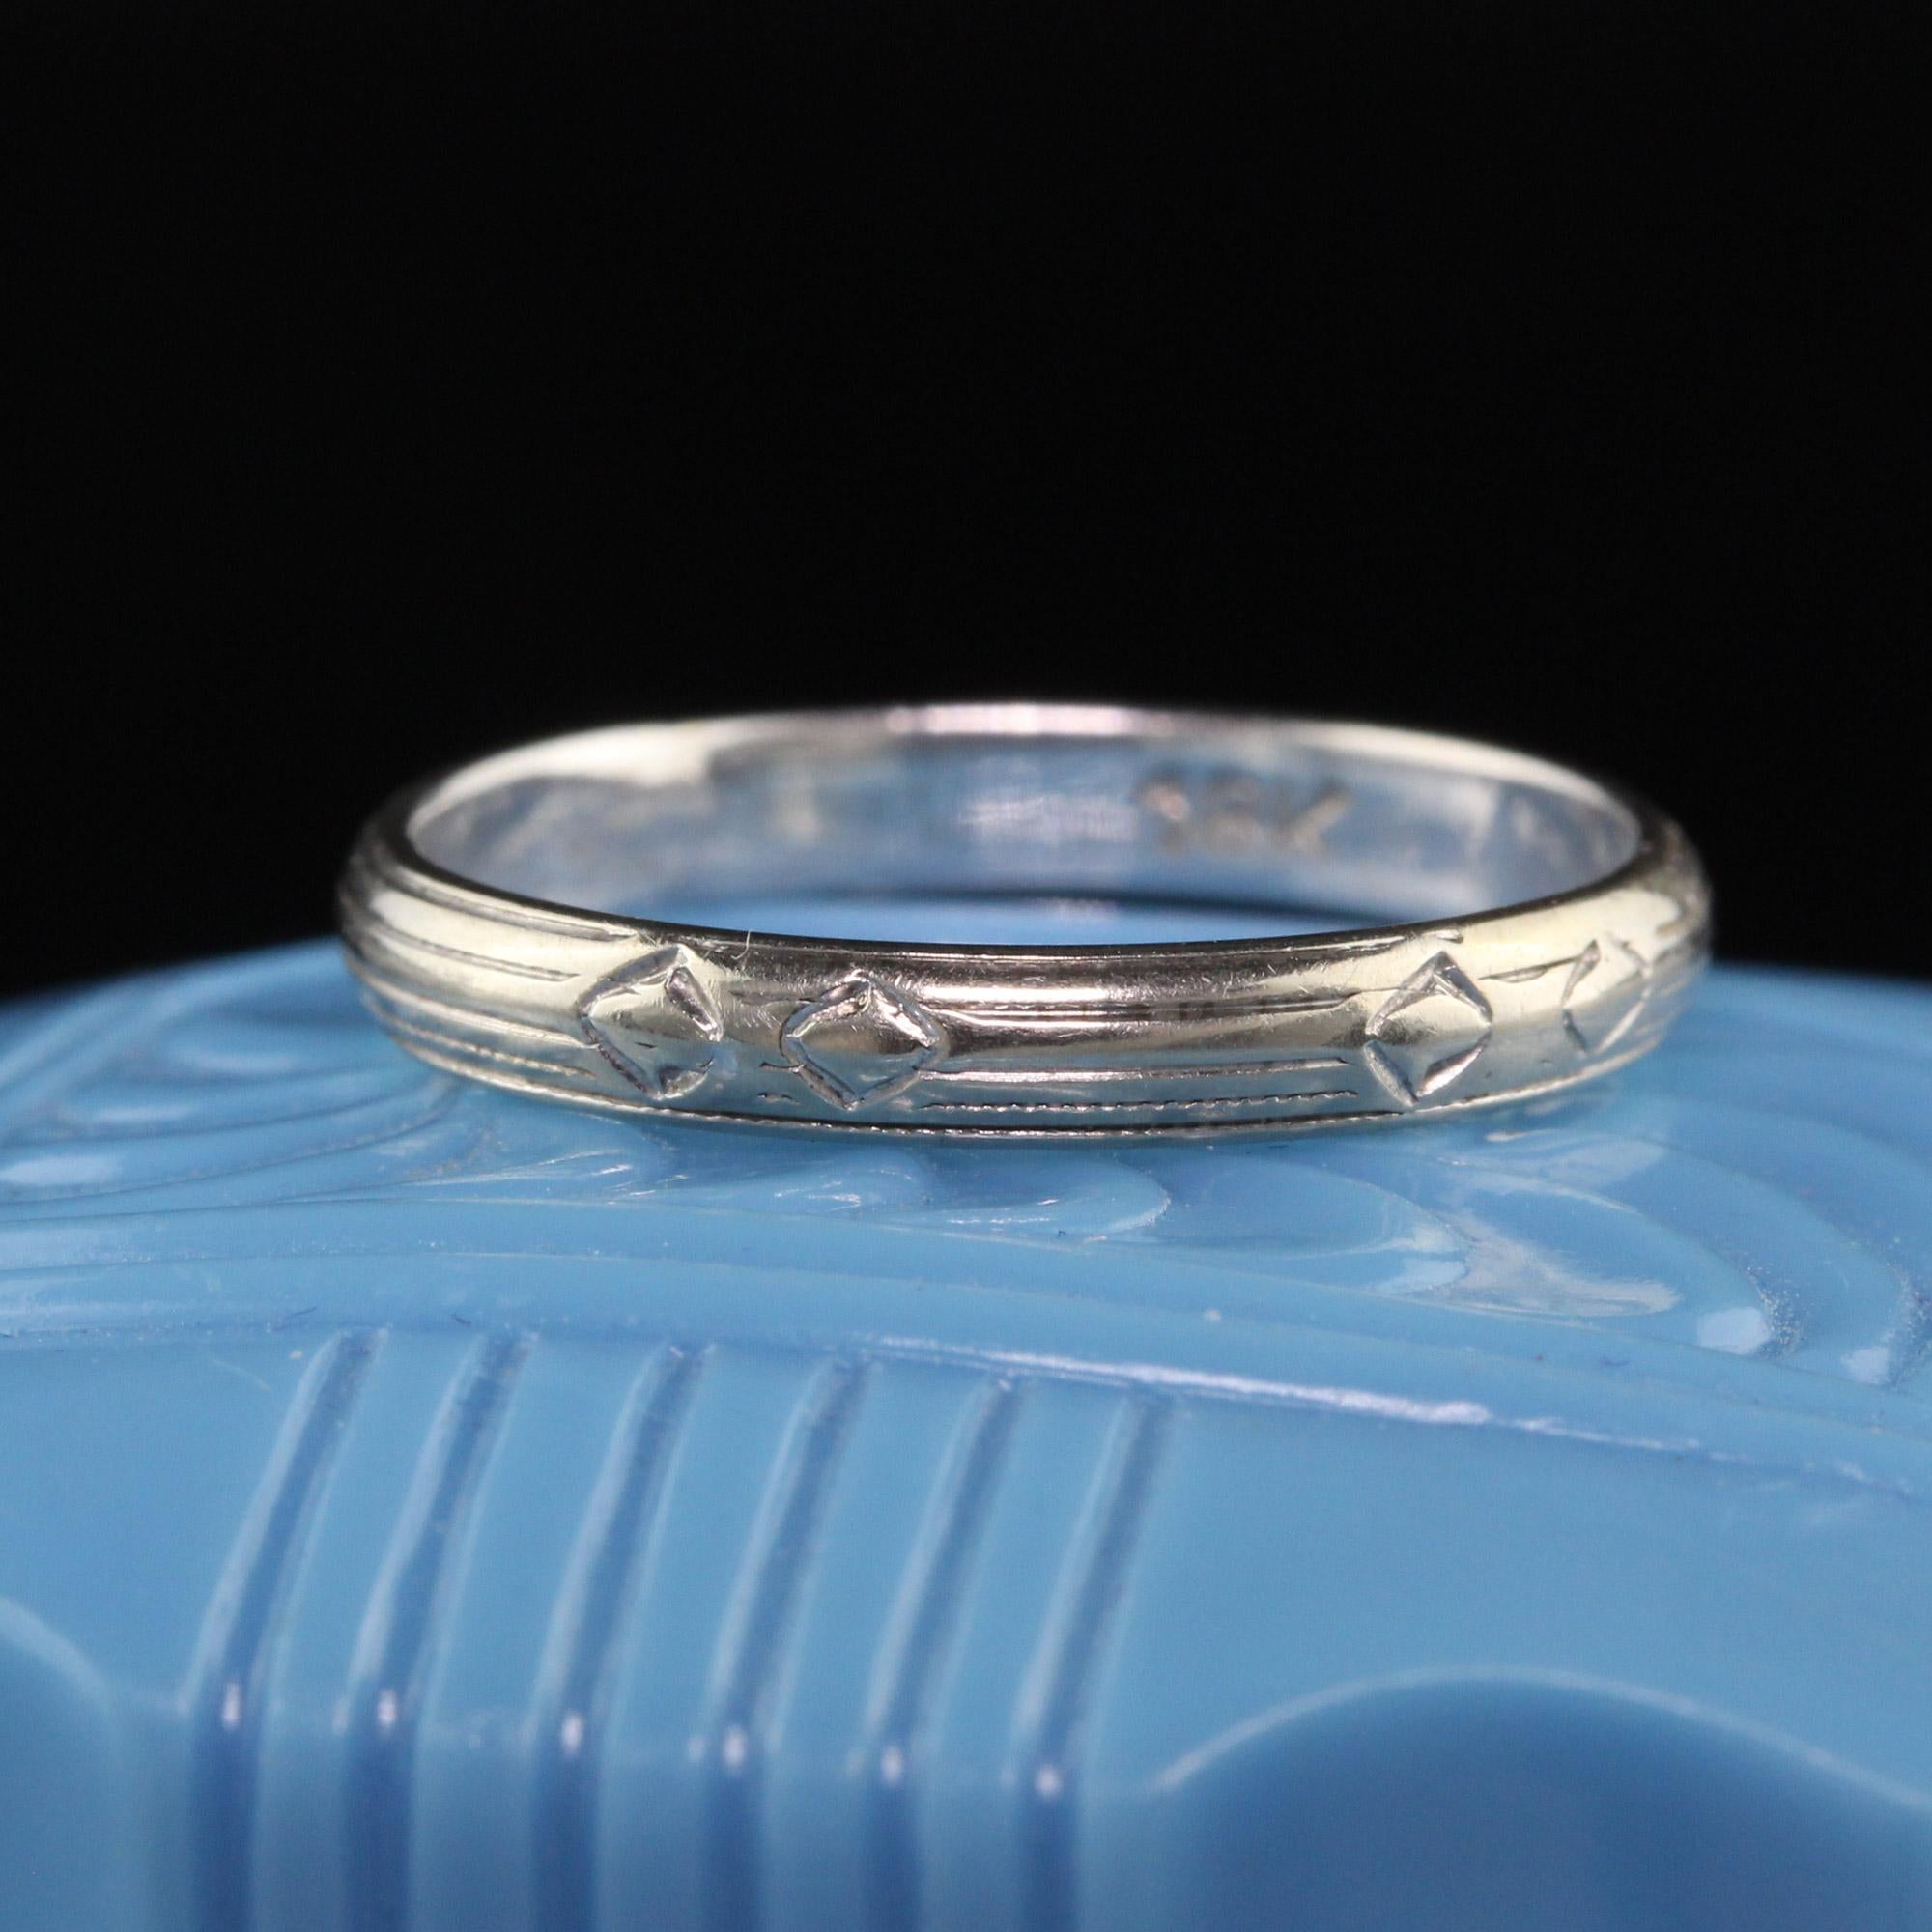 Beautiful Antique Art Deco 18K White Gold Engraved Wedding Band. This gorgeous wedding band is crafted in 18K white gold and has engravings going around the entire ring.

Item #R1191

Metal: 18K White Gold

Weight: 1.6 Grams

Size: 5

Measurements: